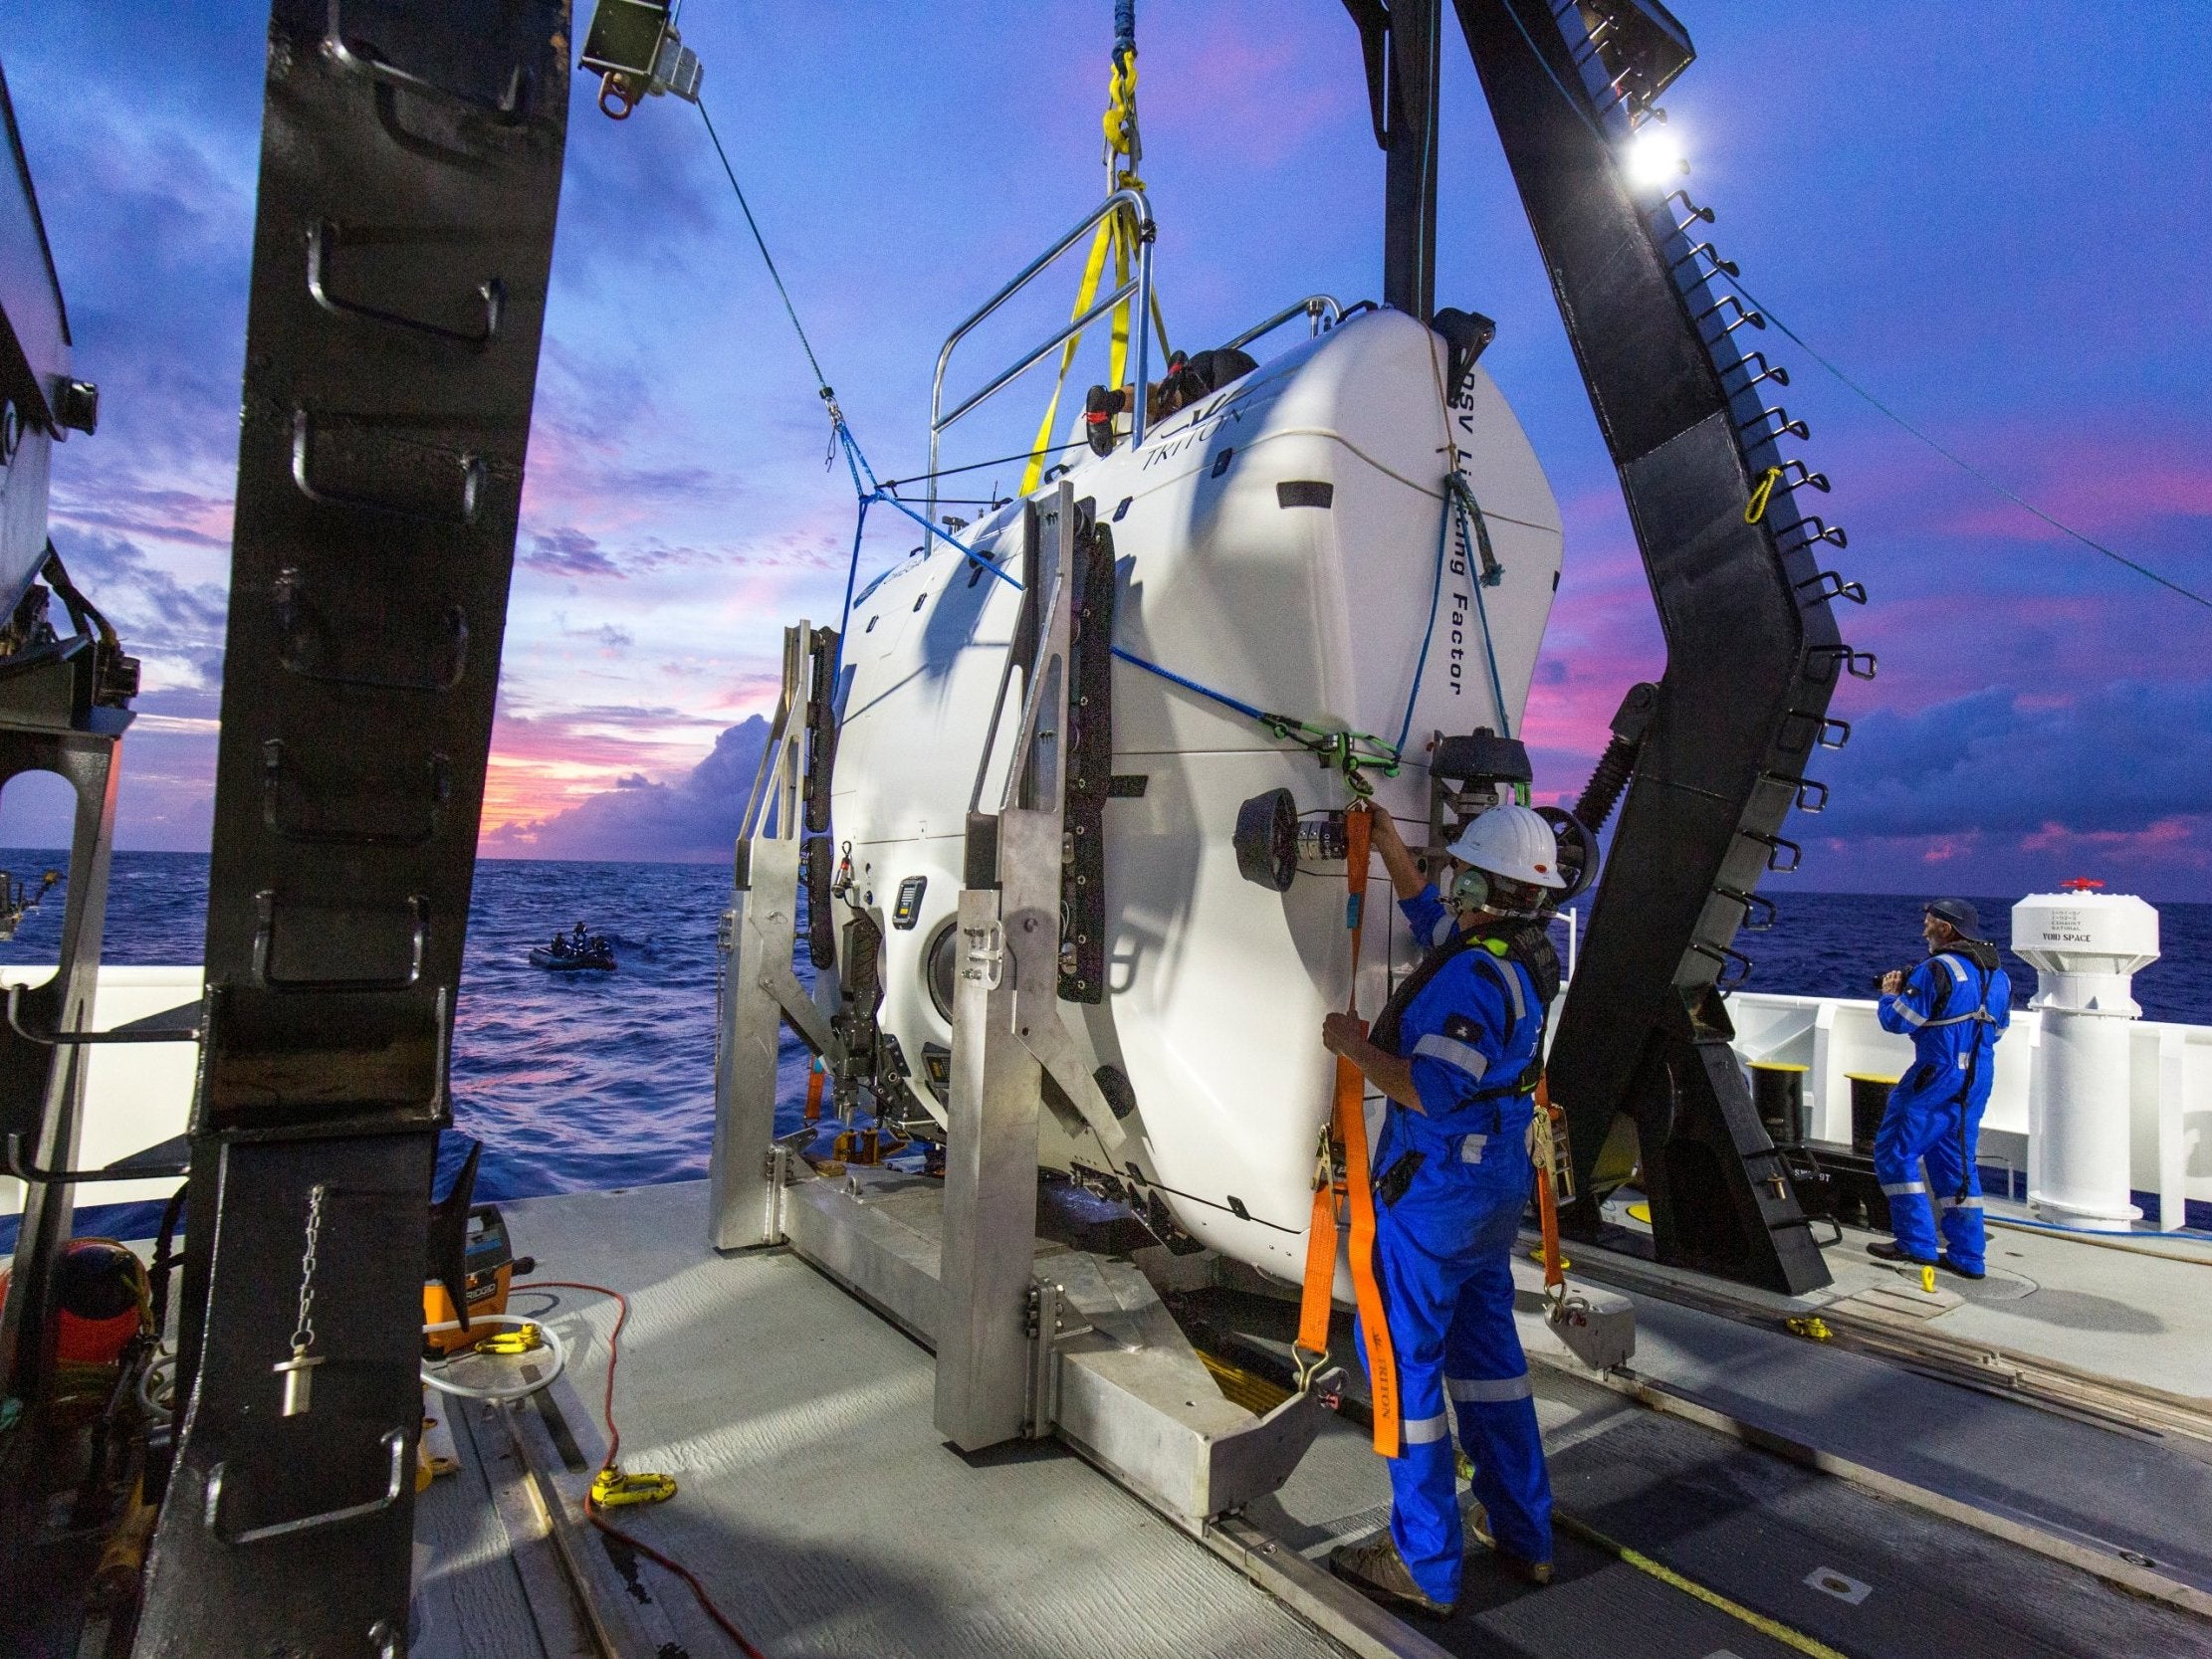 The DSV Limiting Factor submarine has made four descents into the Mariana Trench (Reuters)